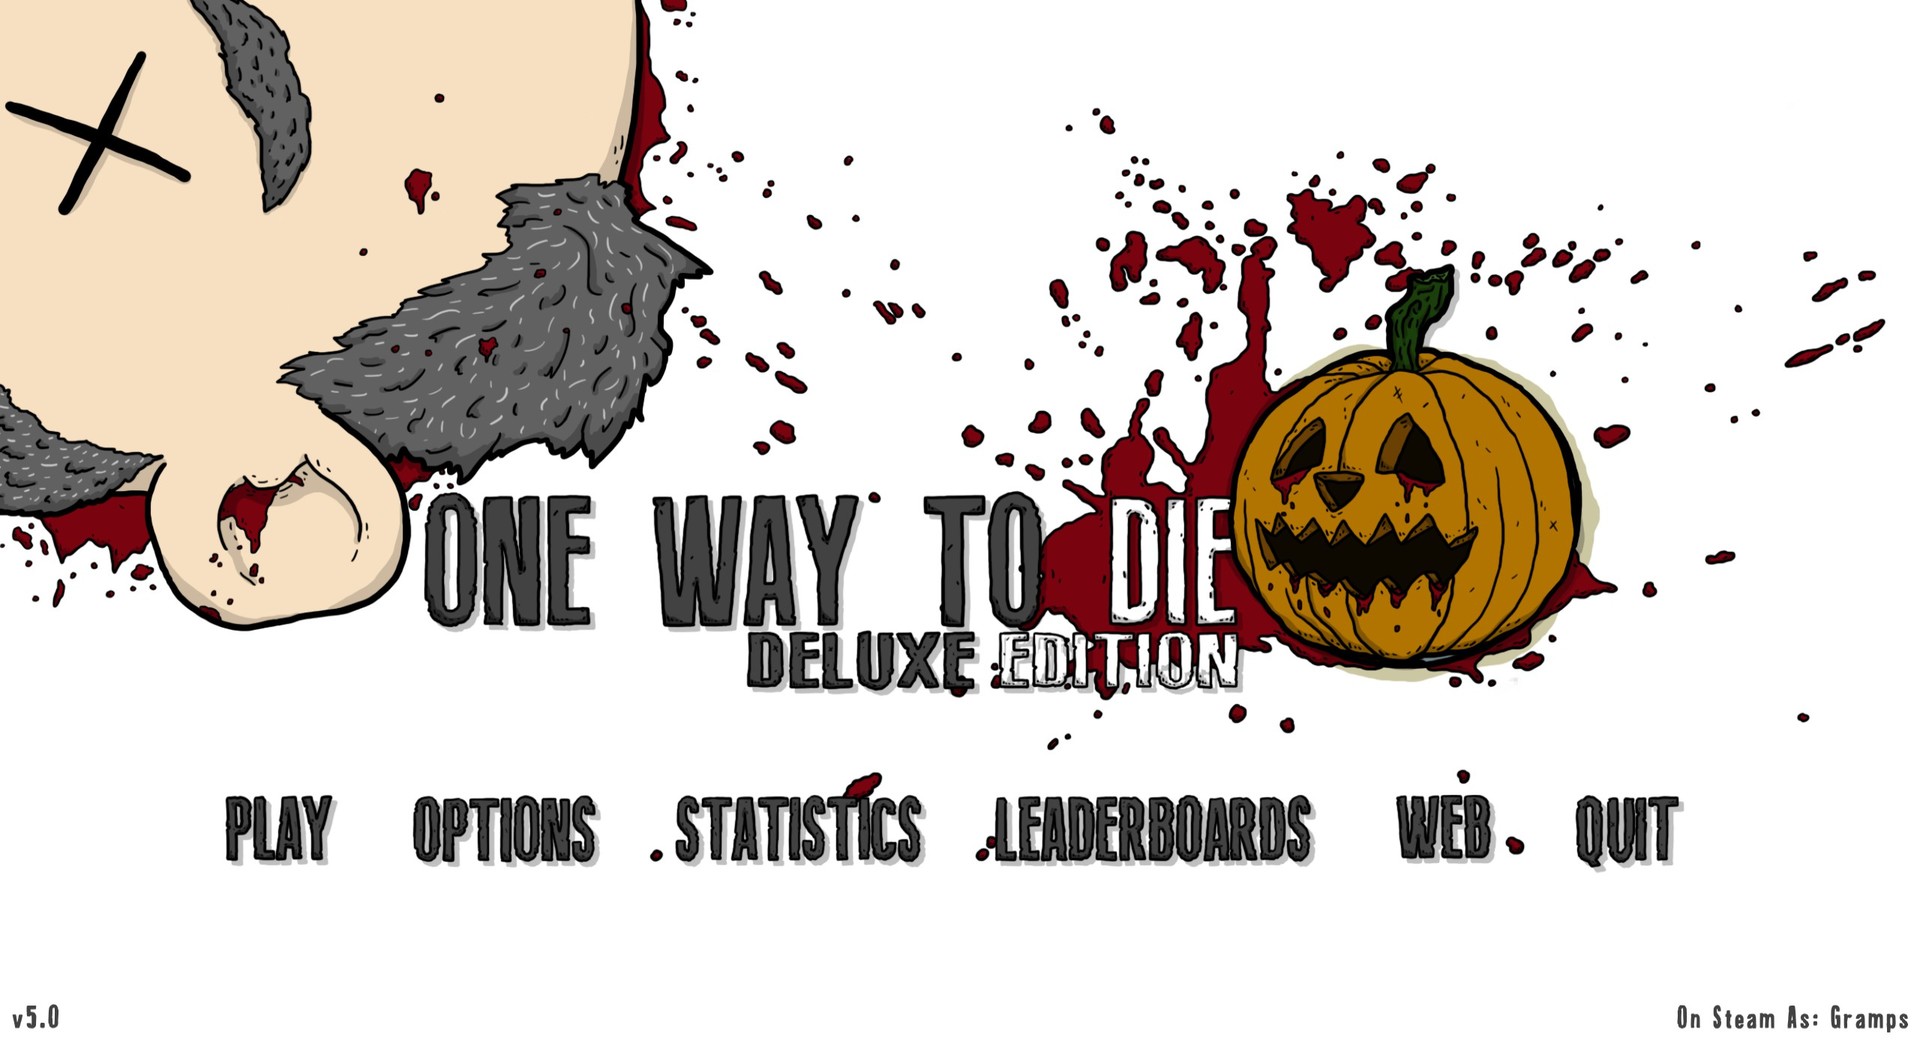 One Way To Die: Deluxe Edition Featured Screenshot #1